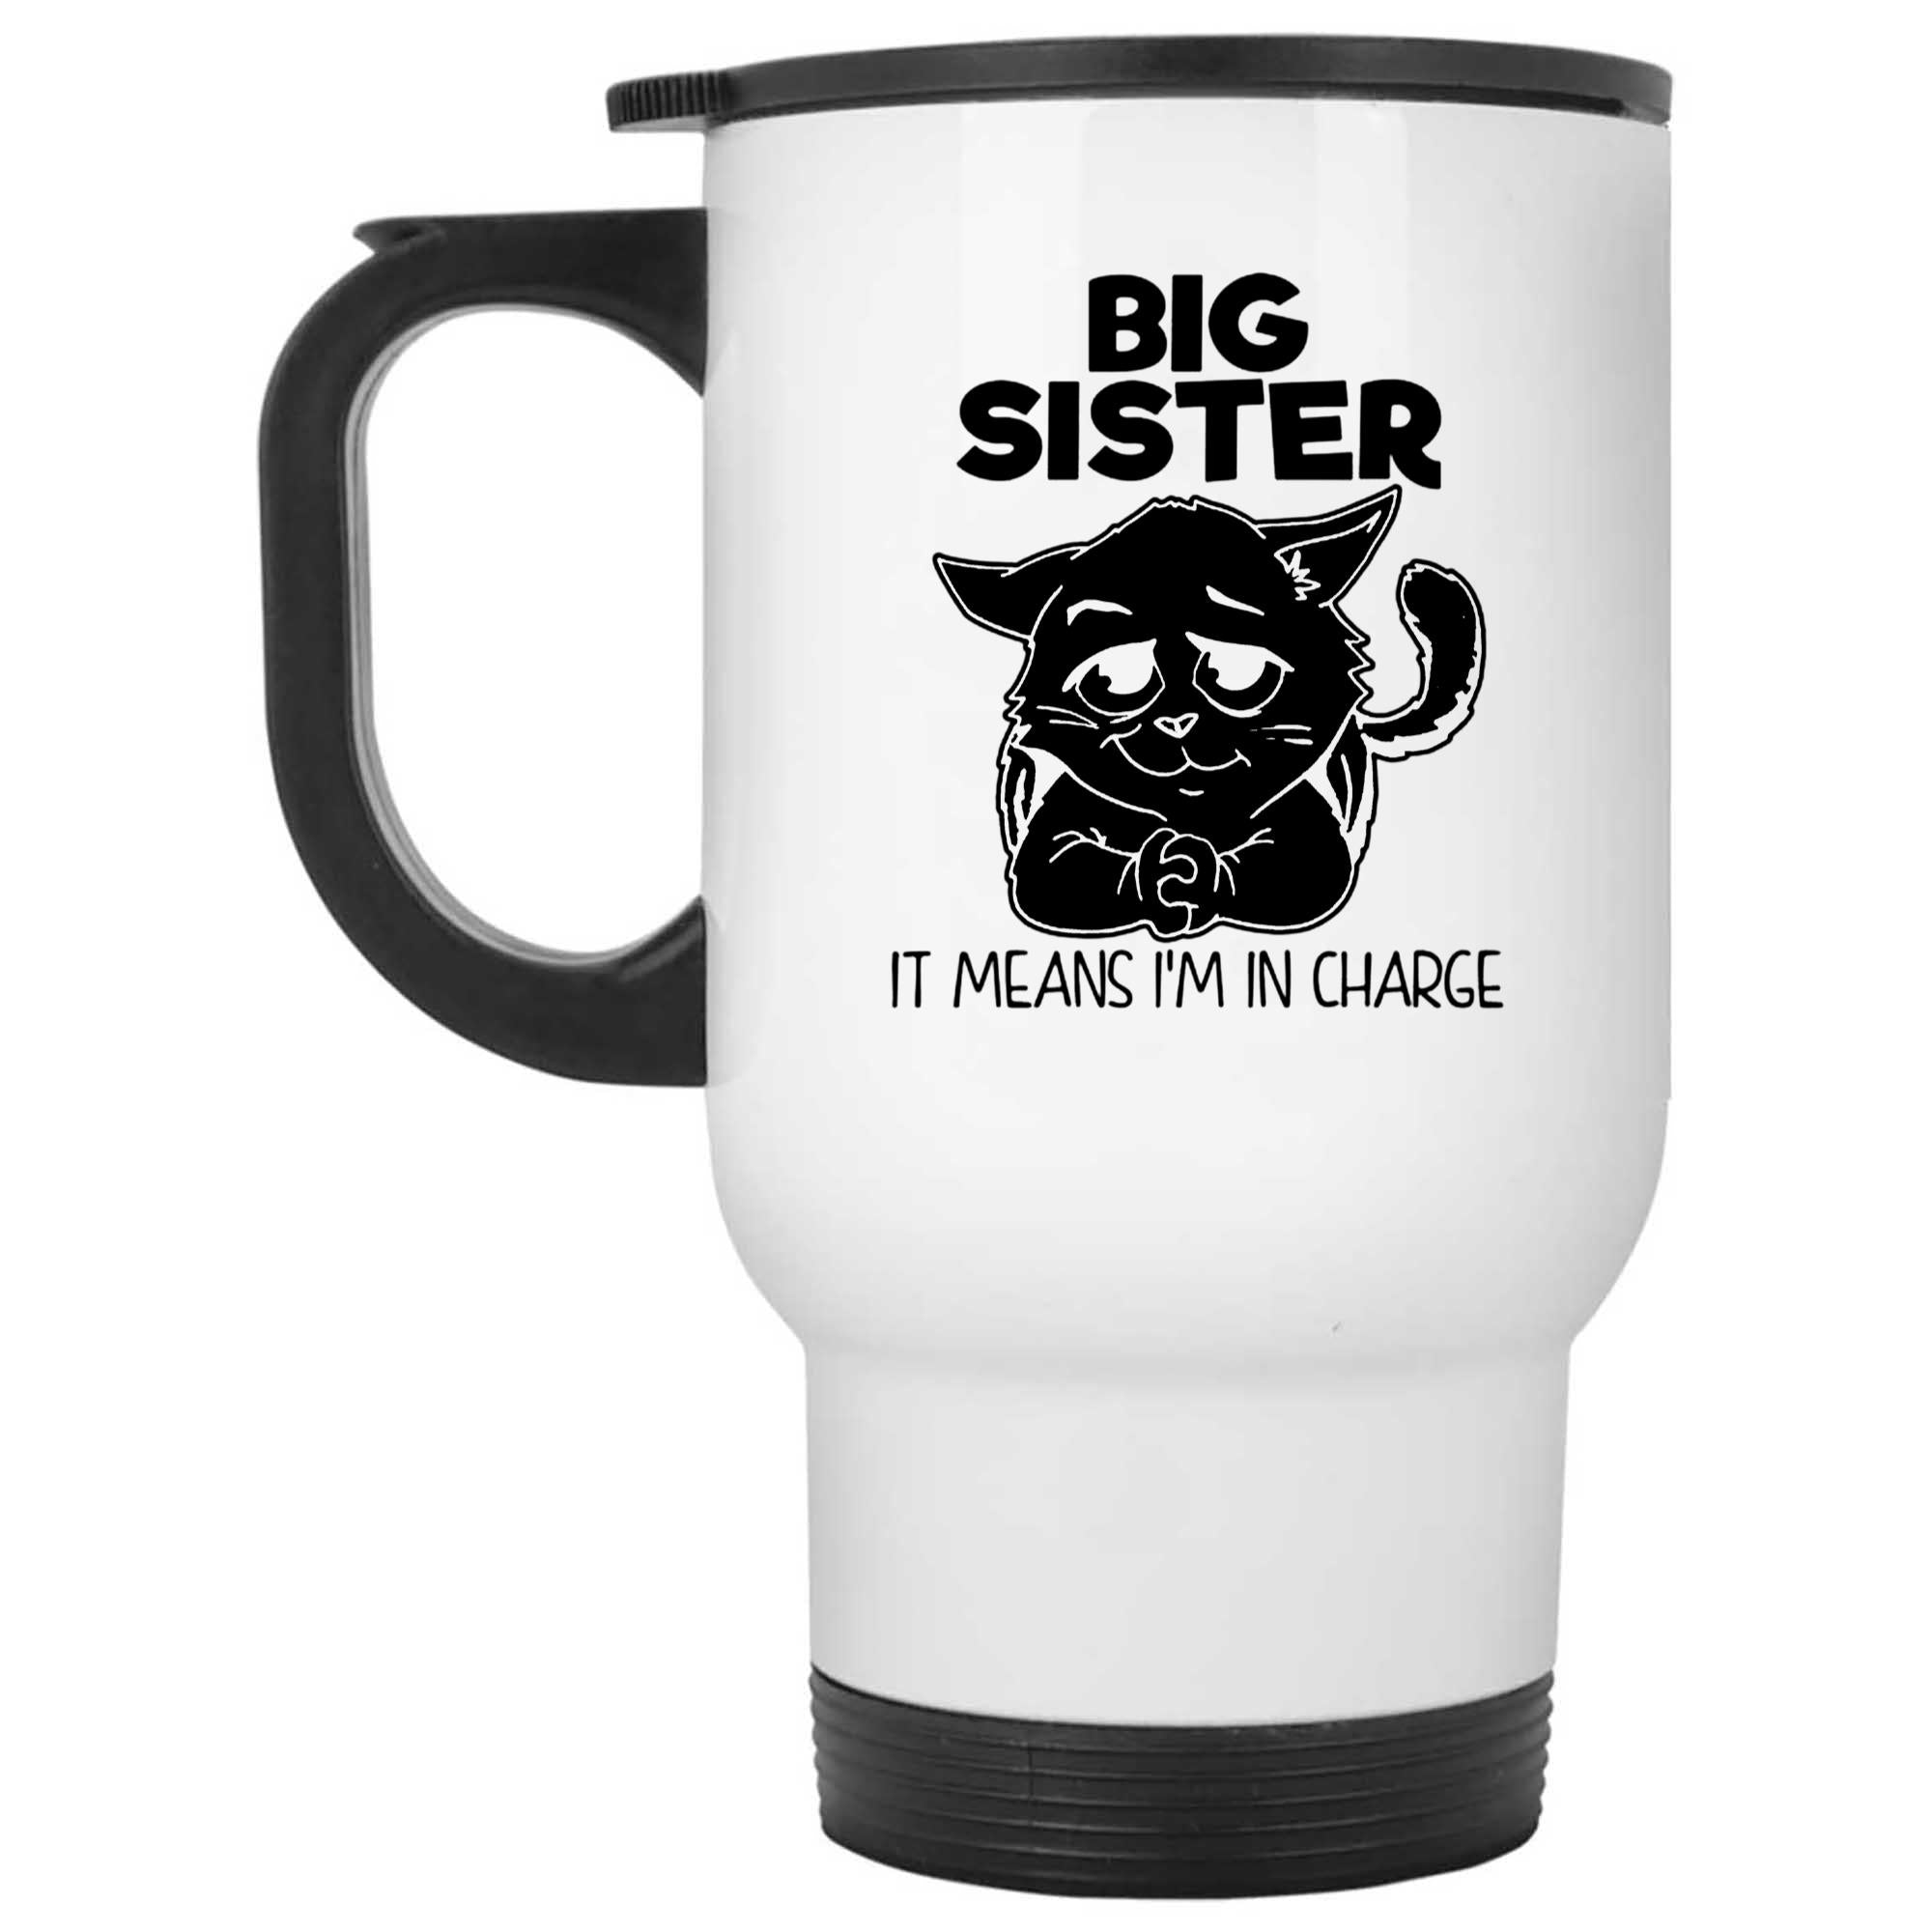 Skitongifts Funny Ceramic Novelty Coffee Mug Big Sister,It Means Im In Charge Cat Lover RsZXjKE